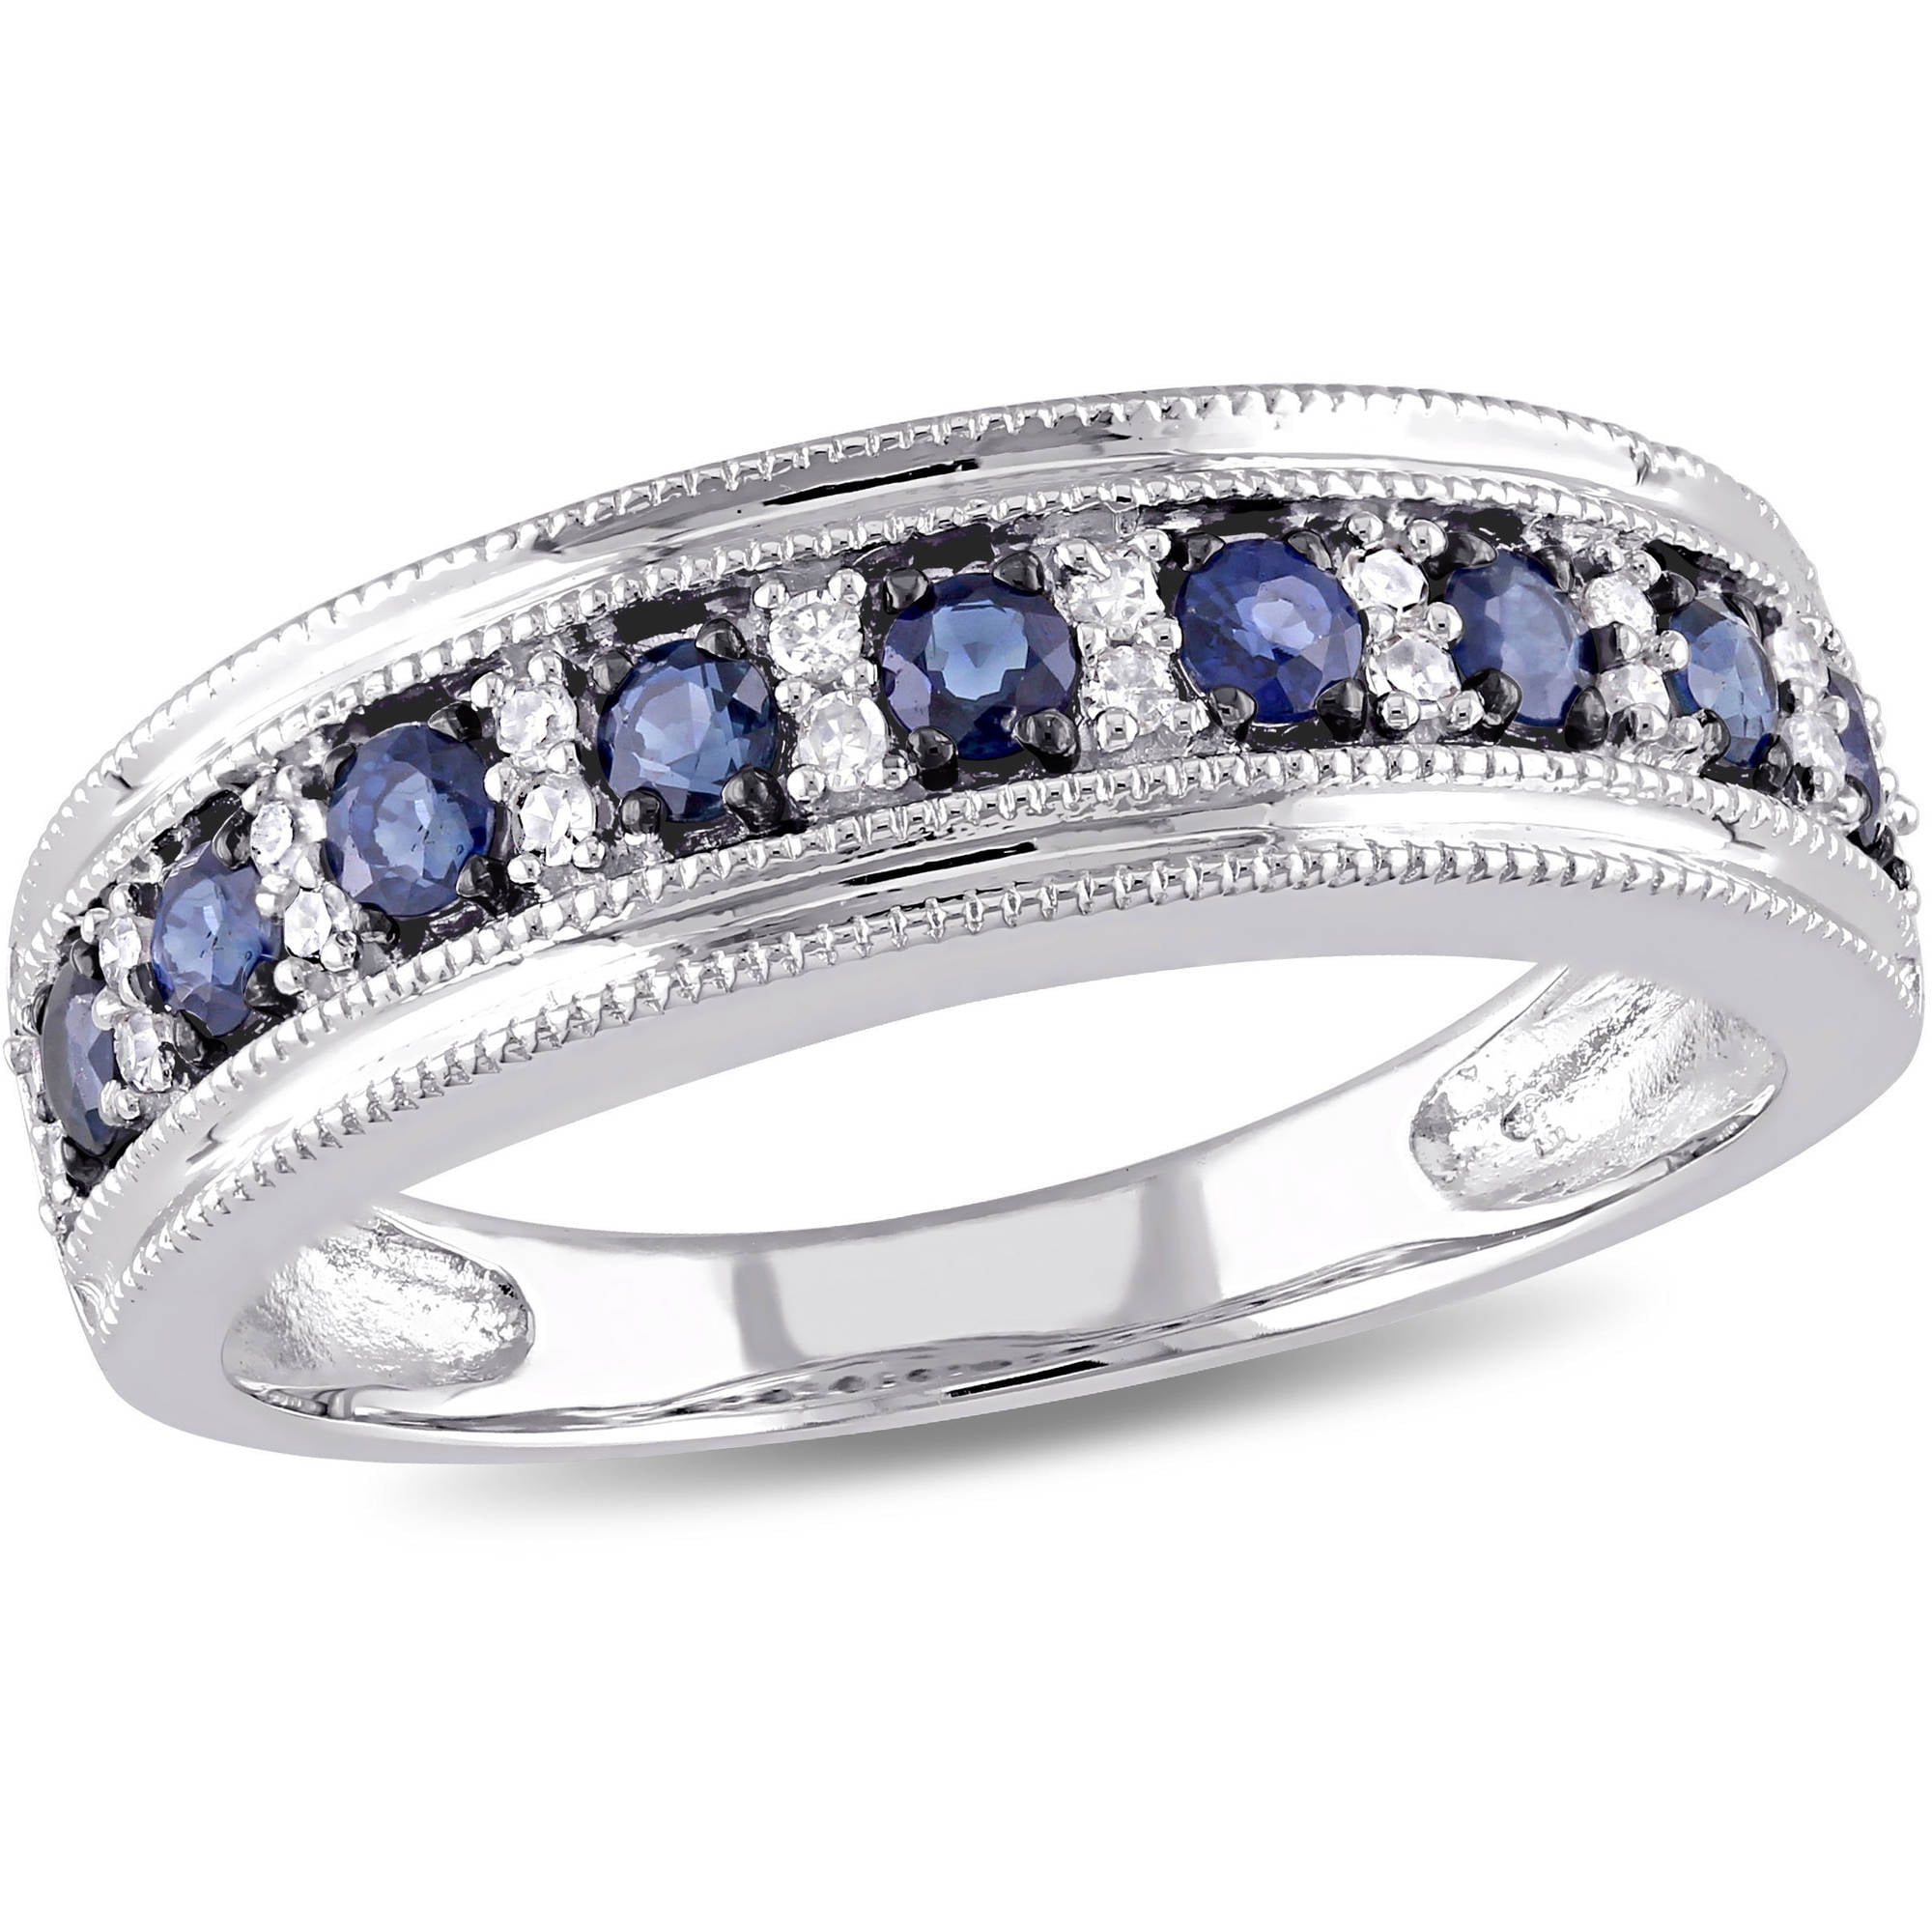 10k Yellow or White Gold Oval 7 x 5 mm Sapphire And Diamond Ring Sizes 4-13